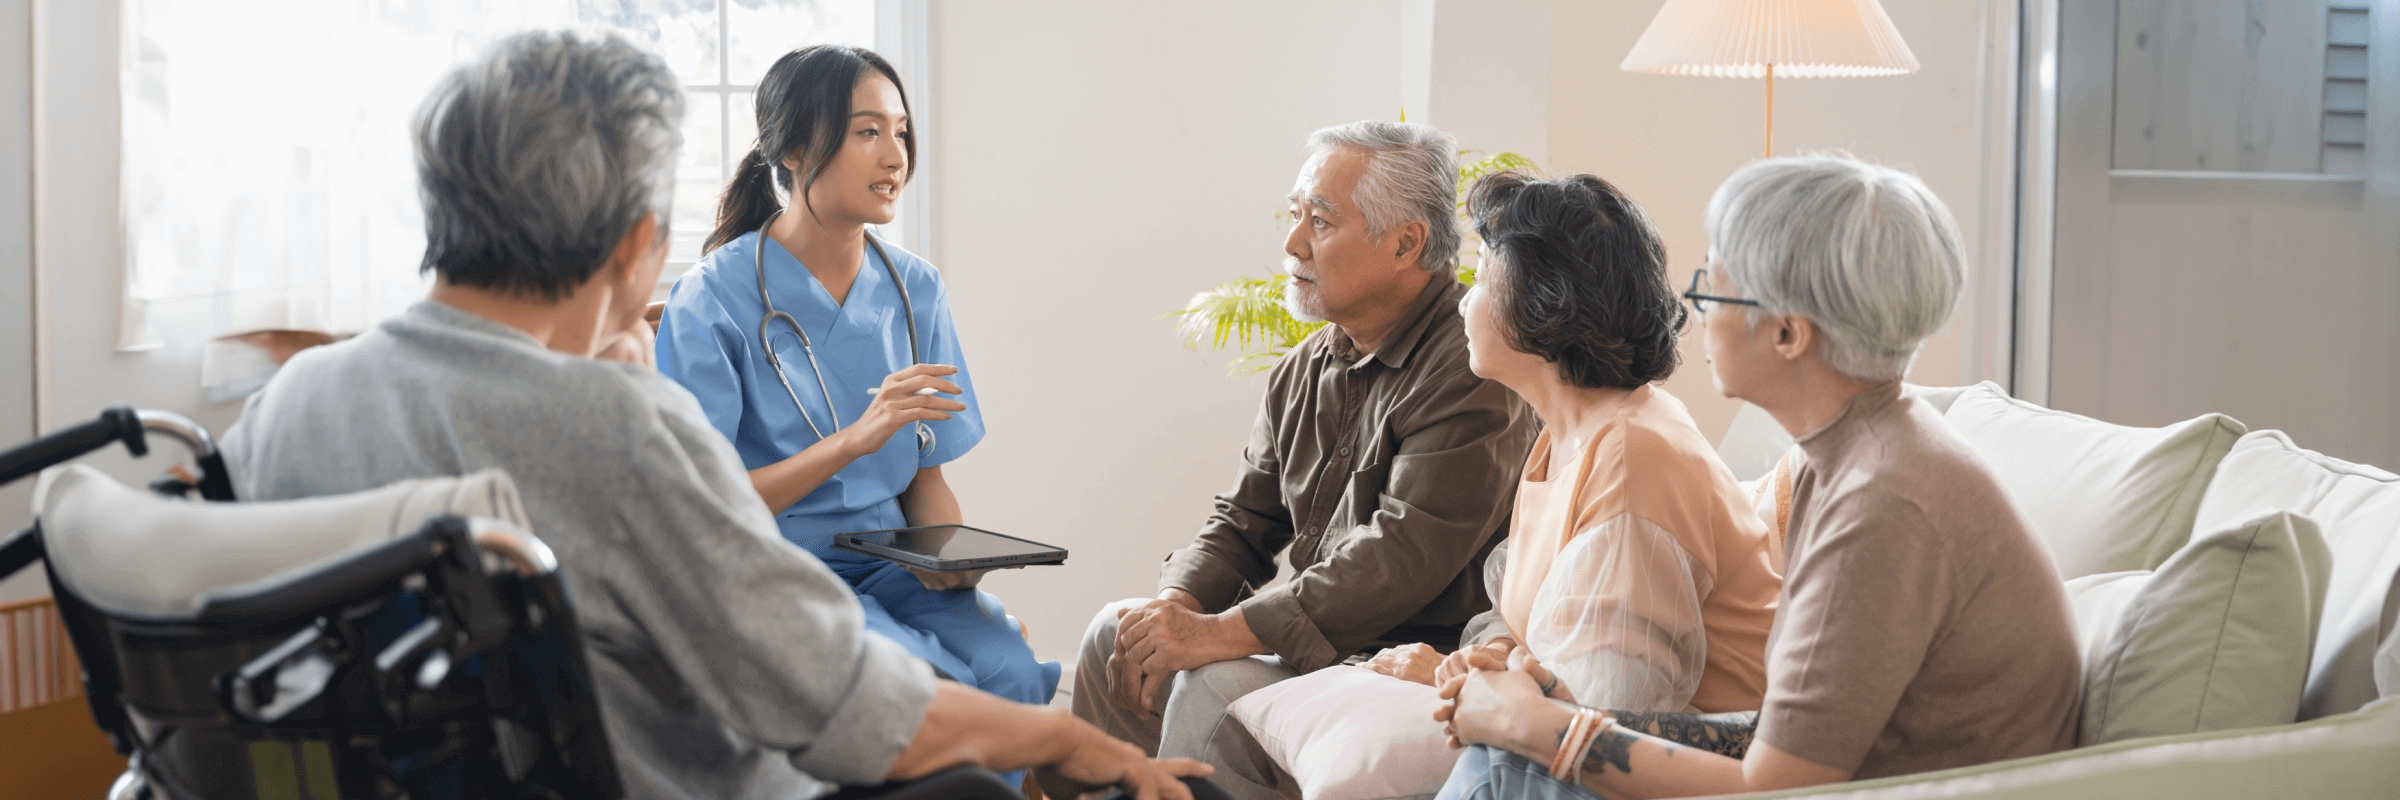 Patient group speaking to a nurse